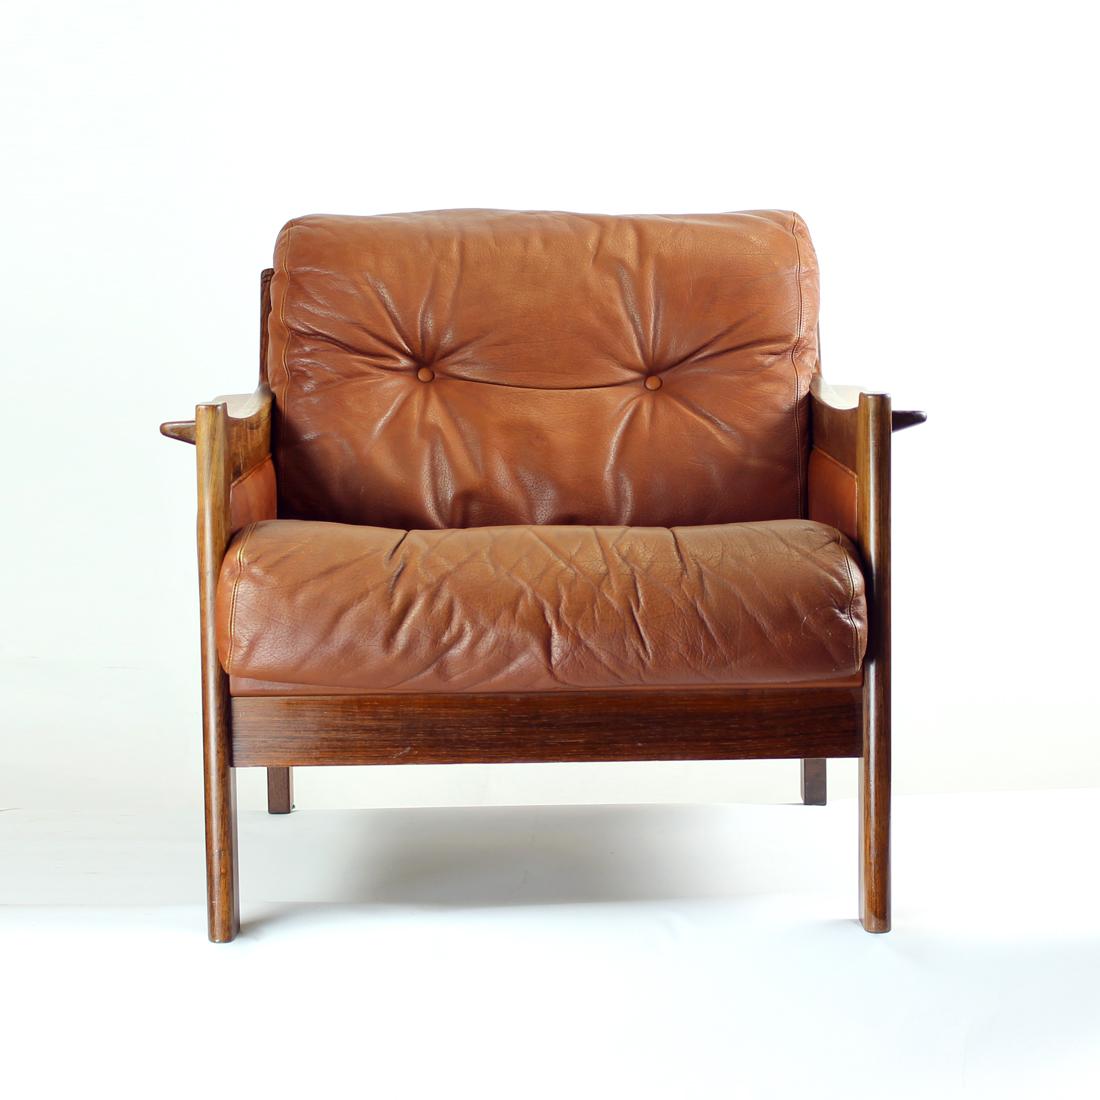 Beautiful armchair or lounge chair produced in 1970s. The frame is a great piece of wood work with some amazing details. The wood is solid rosewood with amazing pattern. The seat and backrest is finished with a cushion in cognac leather. Excellent